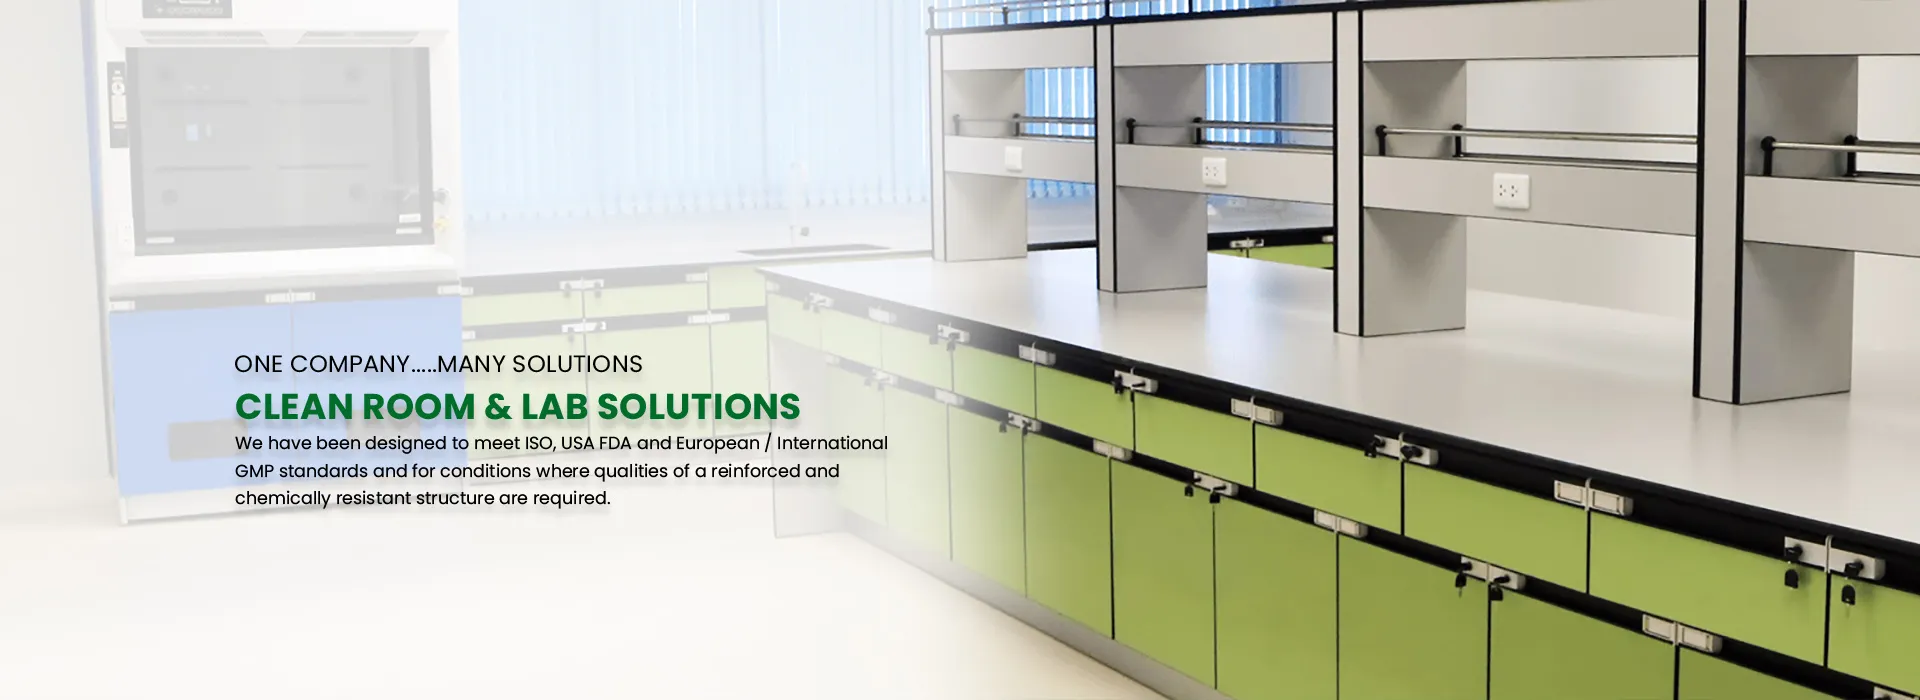 Clean Room and Lab Solution furniture manufacturer